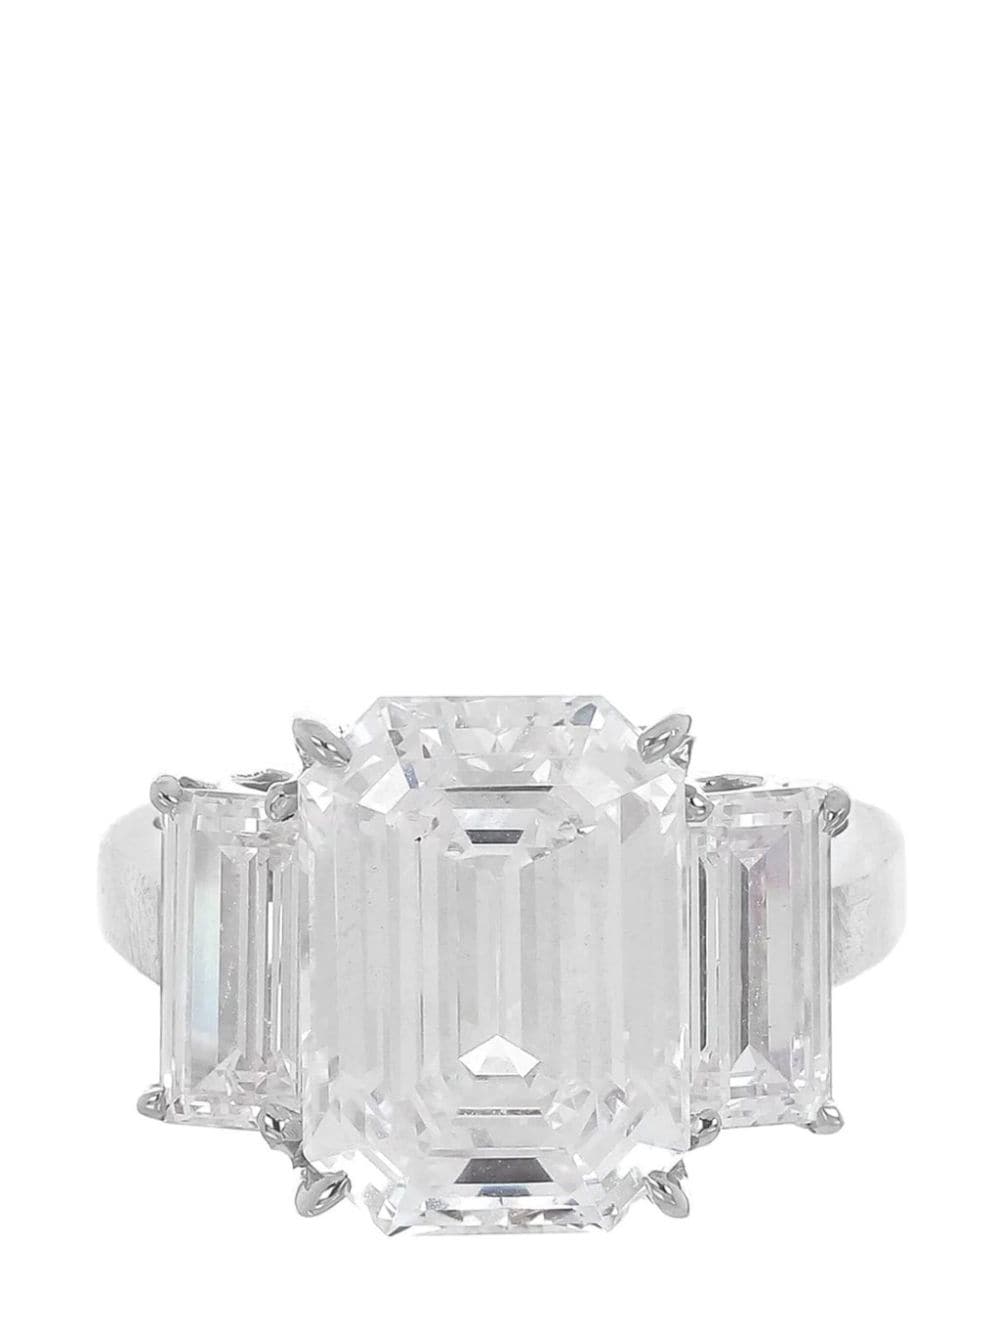 Fantasia By Deserio 14kt White Gold Cubic Zirconia Ring